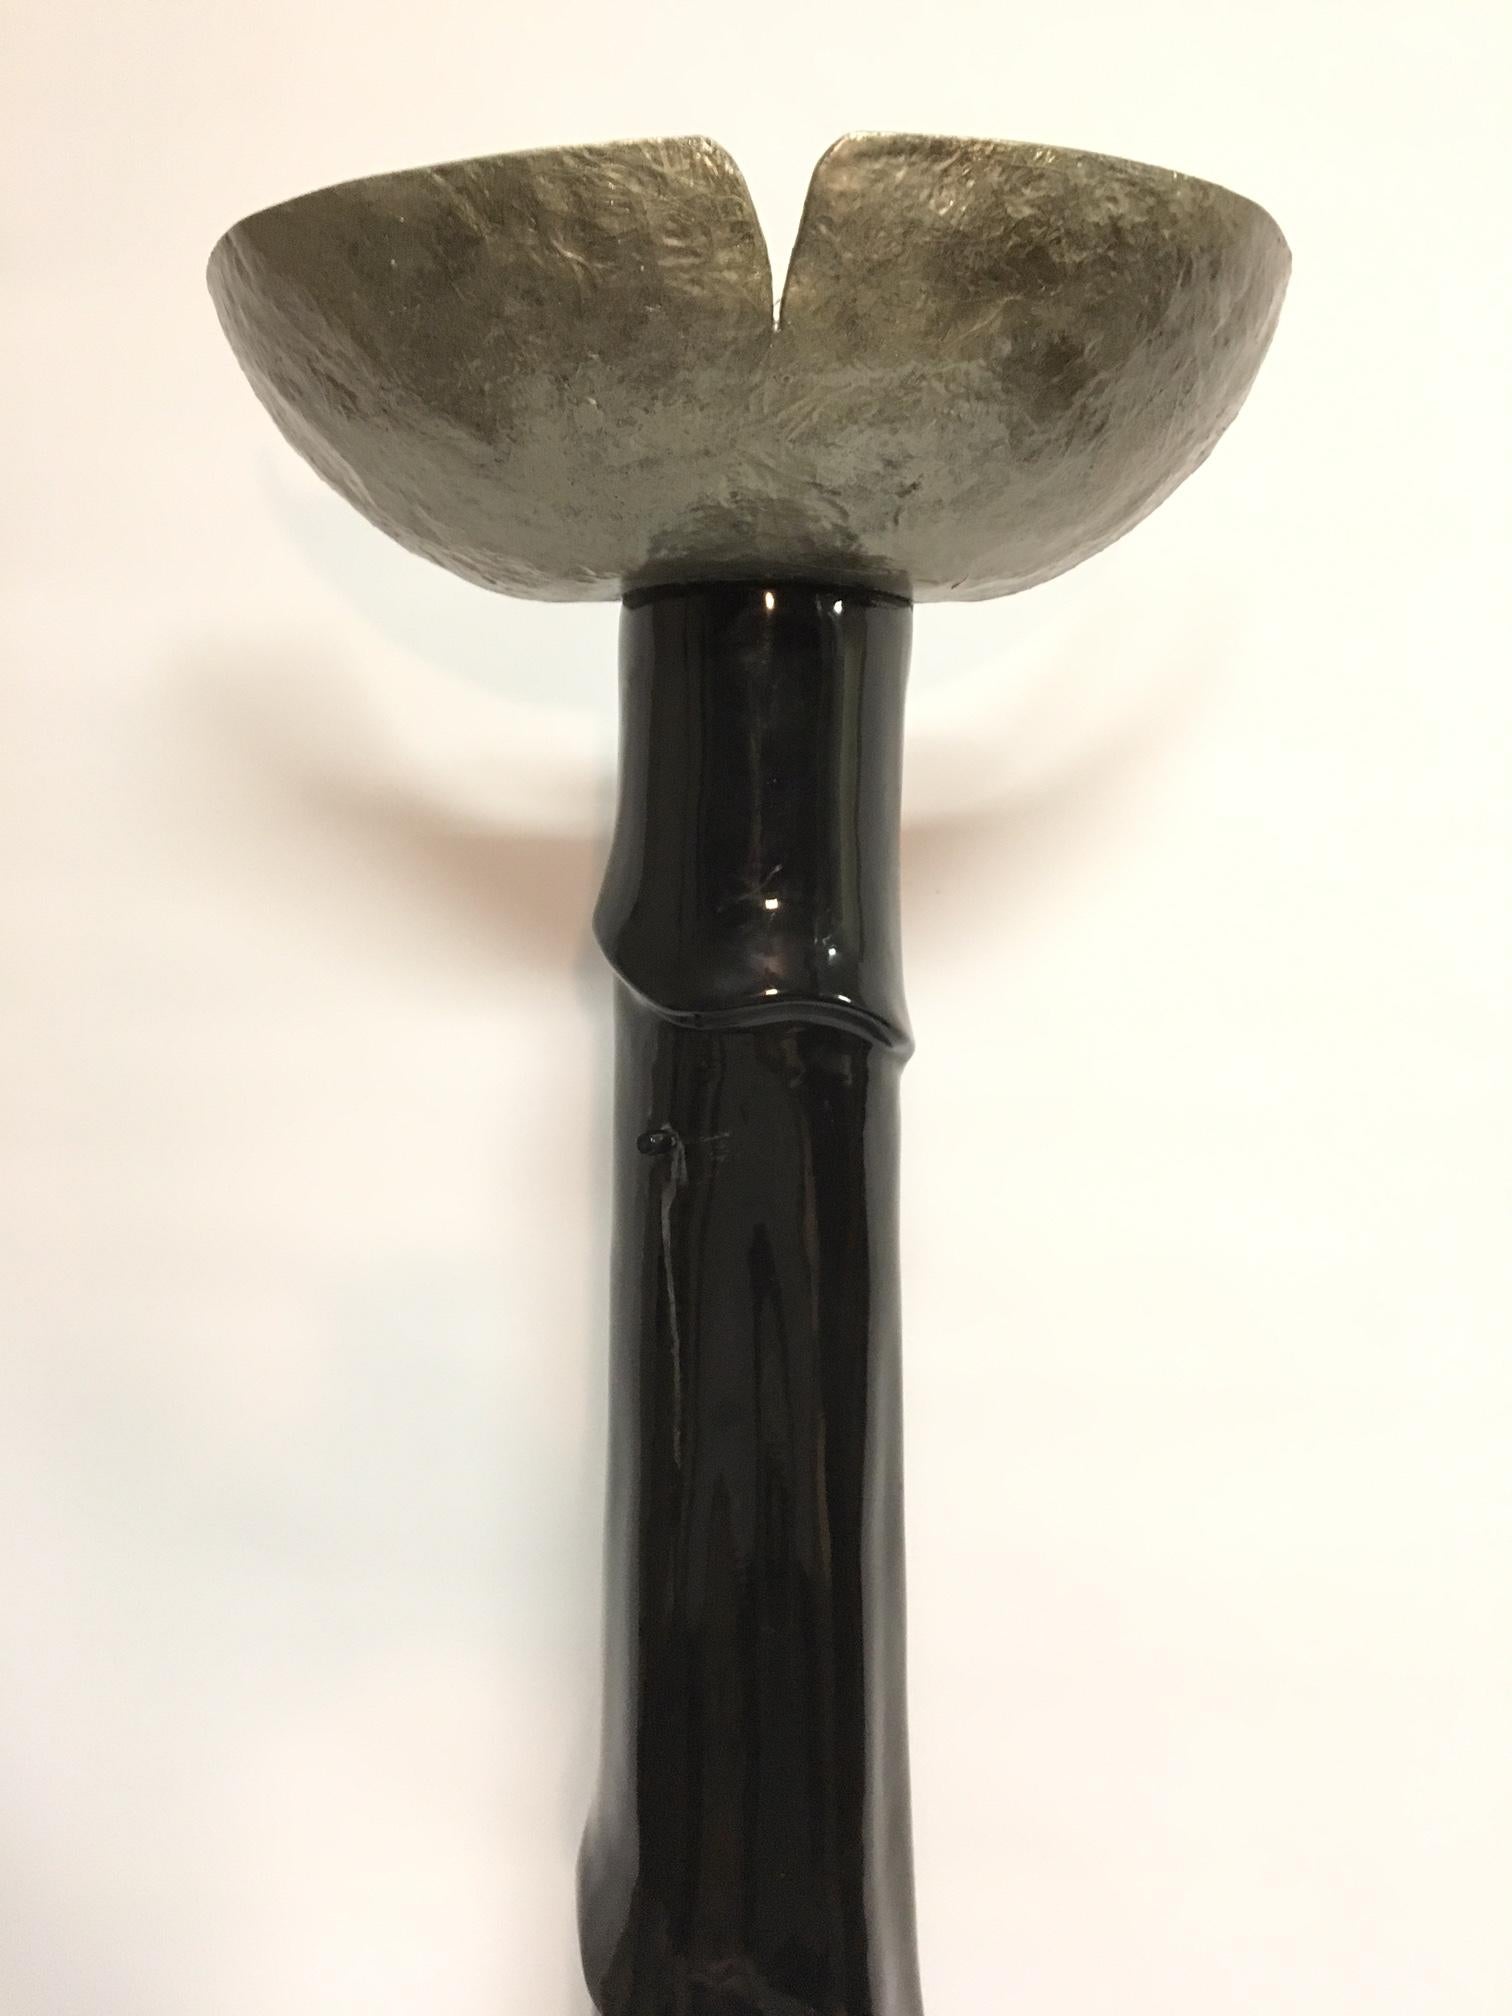 Unusual sculptural floor lamp designed to stand against a wall. Tall base with carved drape form with silver shade. Made of cast resin. Holds 2 standard light bulbs. Stands 74.5